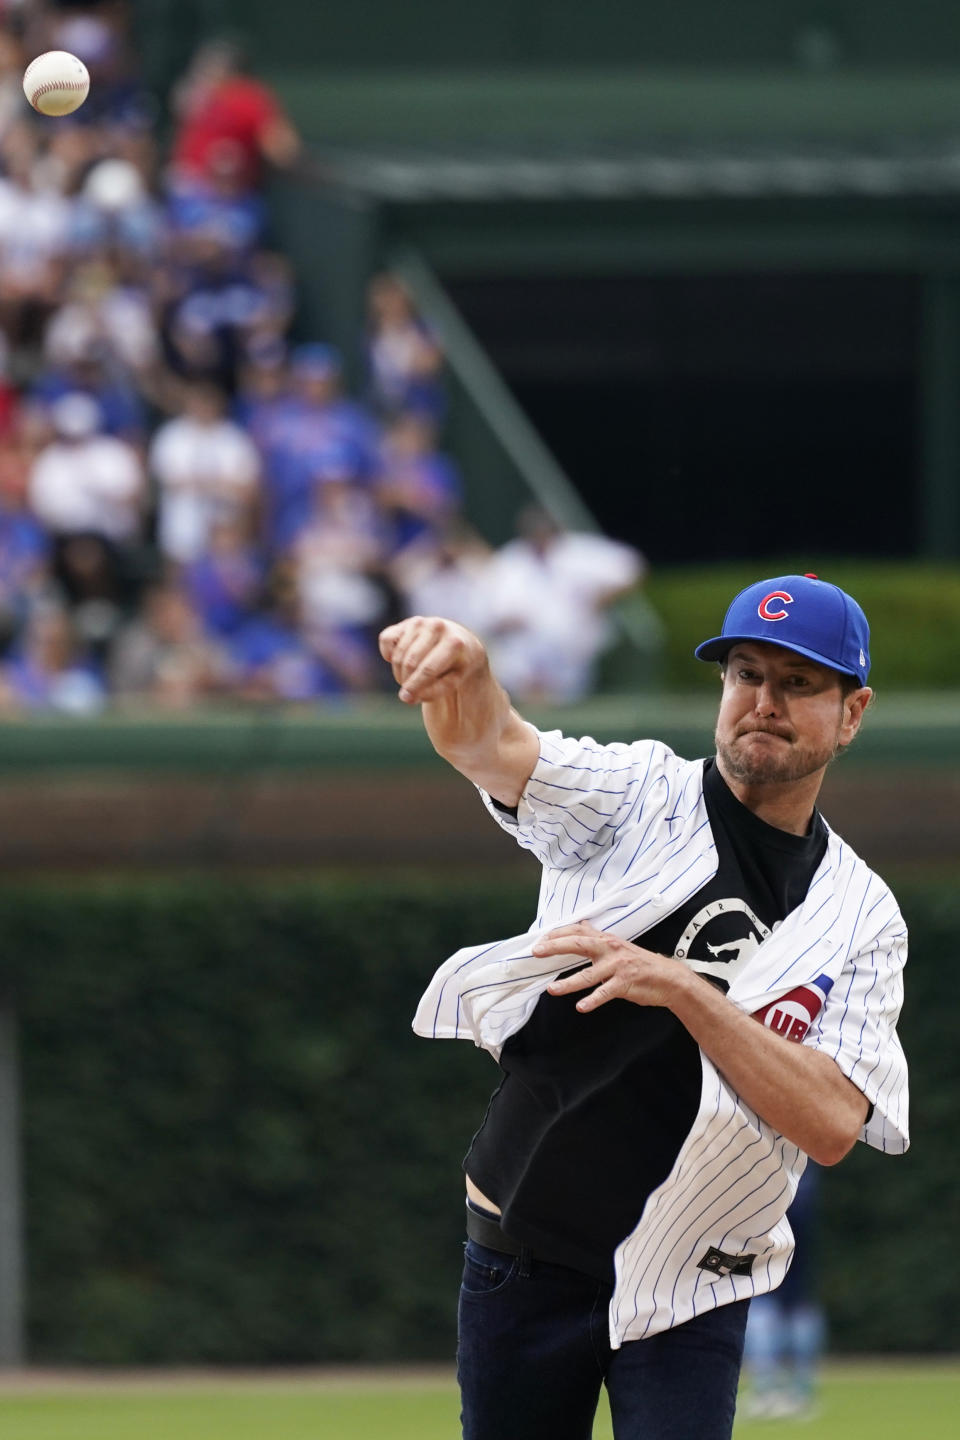 Former NASCAR champion Kurt Busch throws out a ceremonial first pitch before a baseball game between the Boston Red Sox and the Chicago Cubs in Chicago, Friday, July 1, 2022. (AP Photo/Nam Y. Huh)